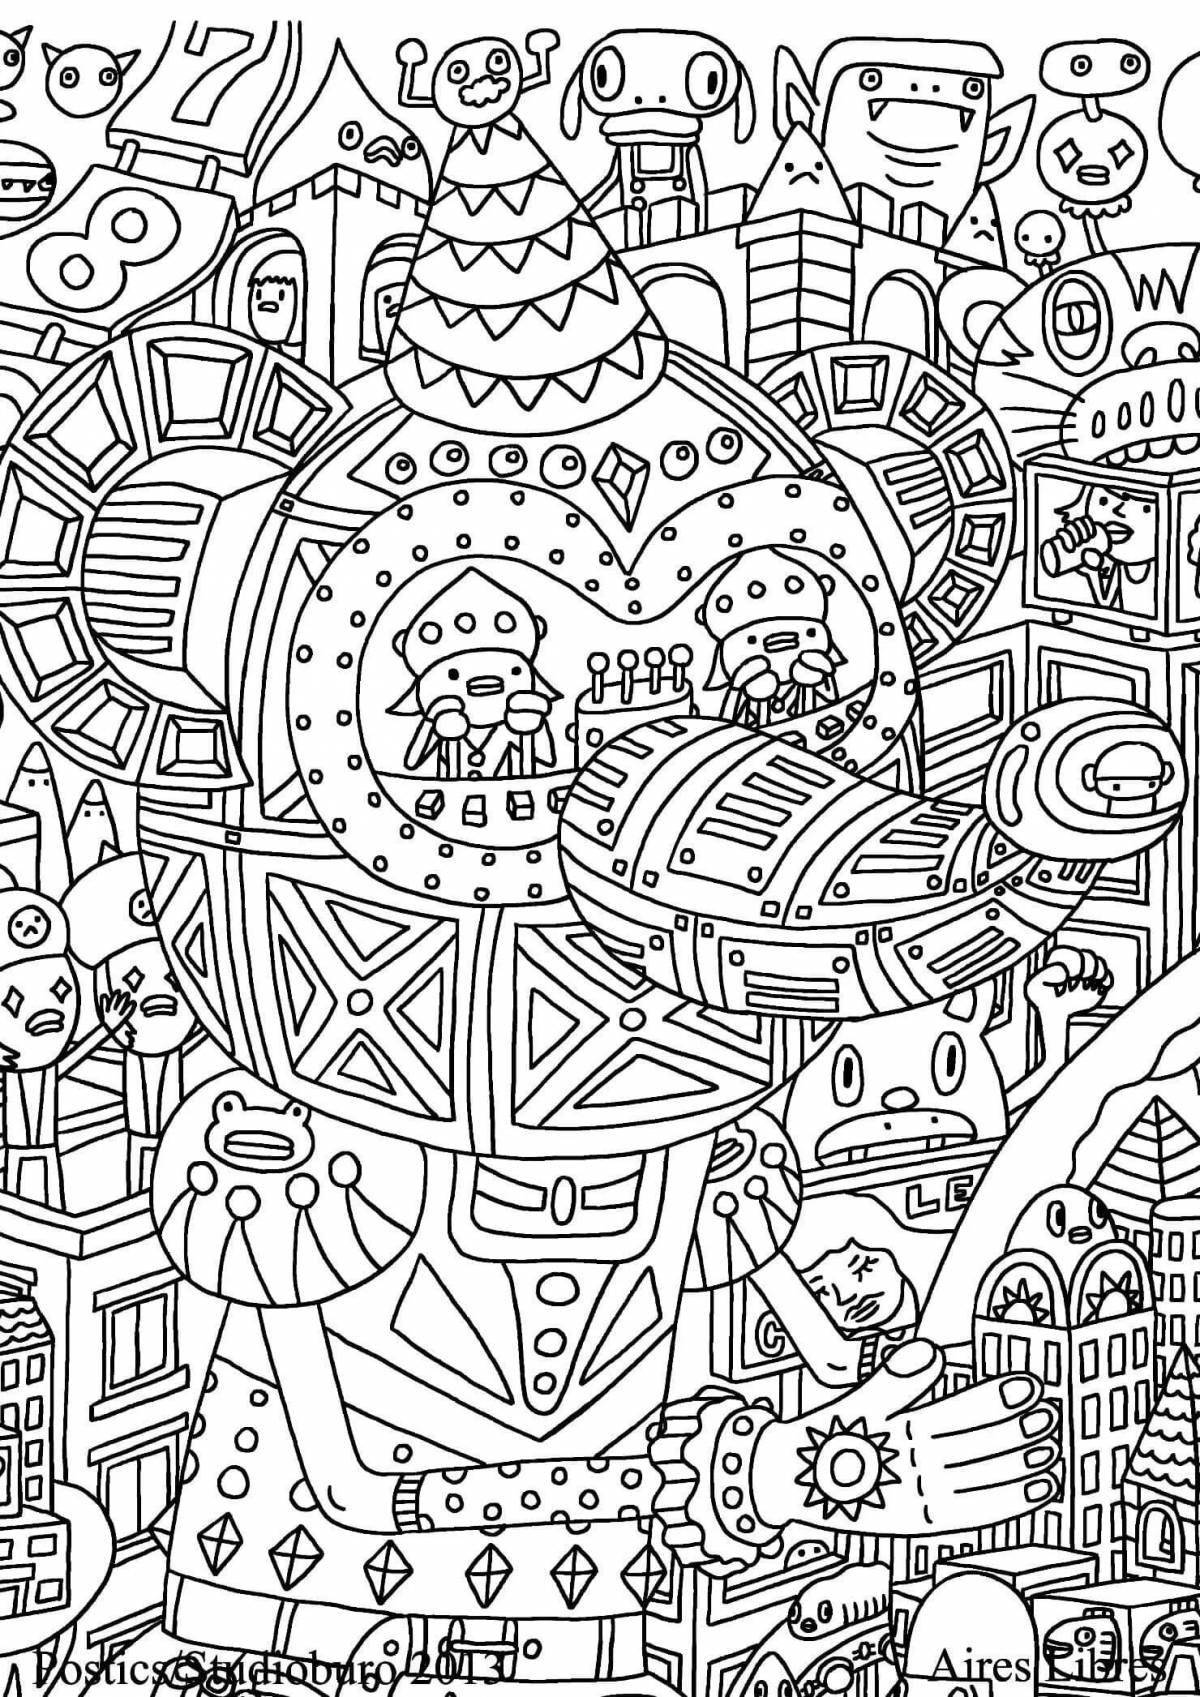 Intriguing modern coloring book for adults